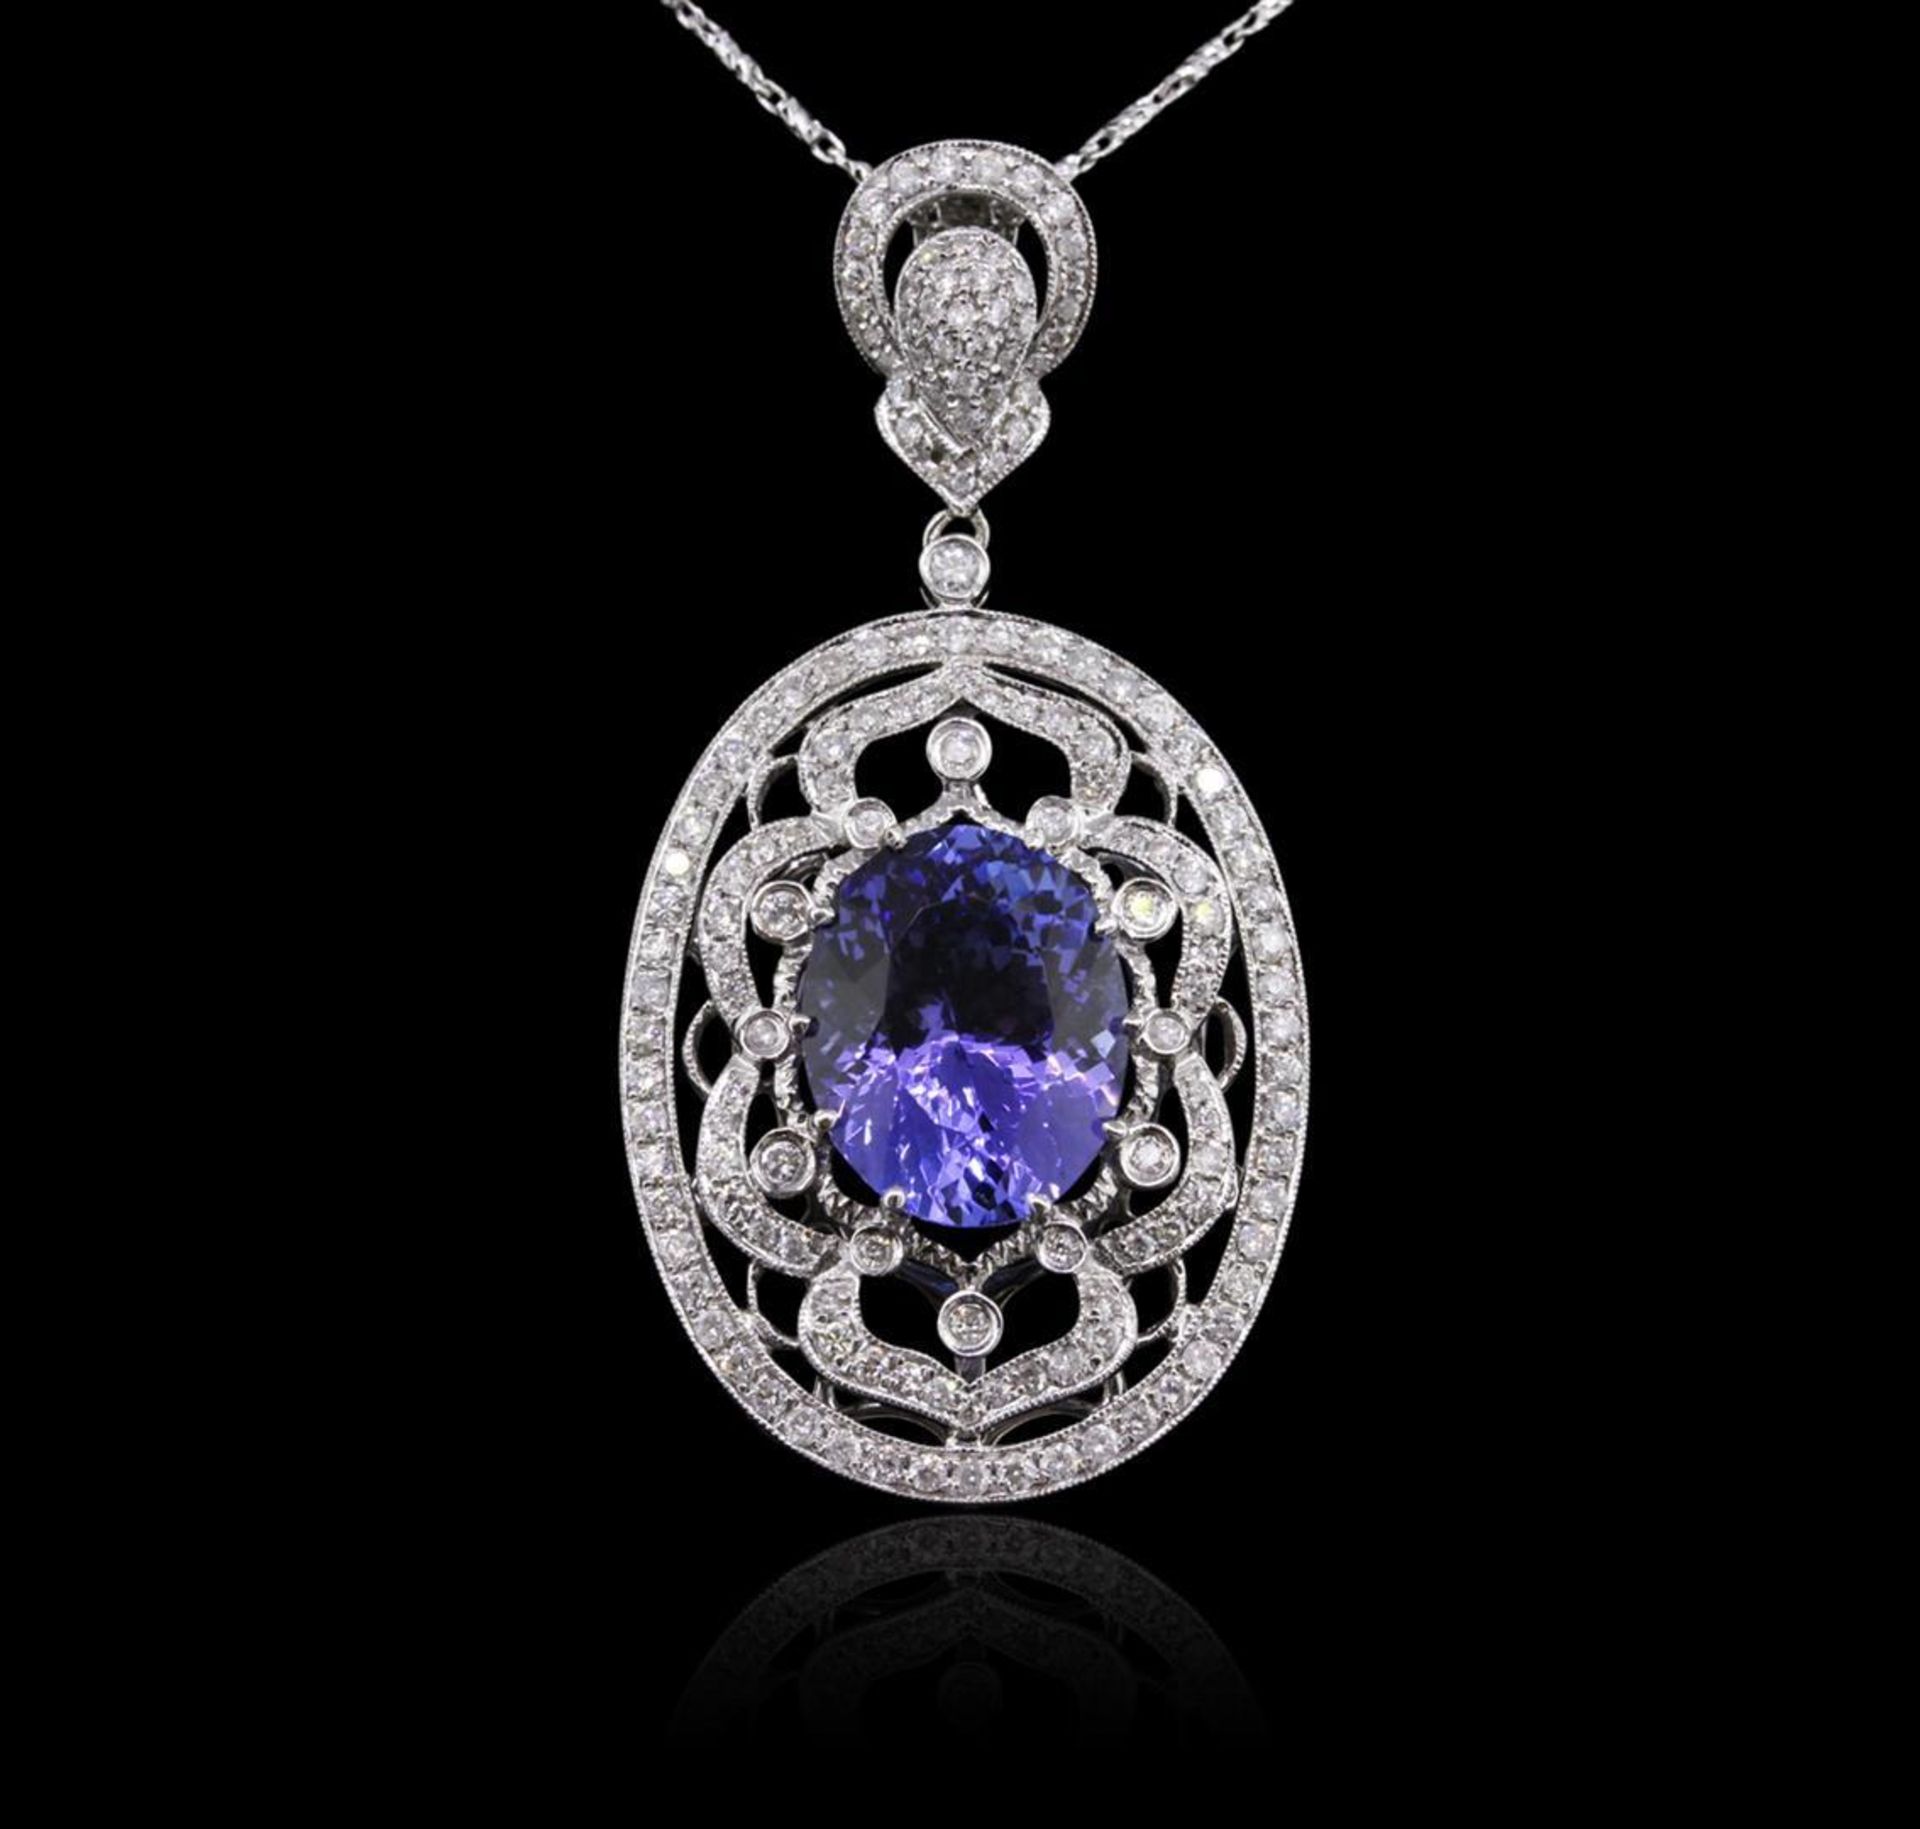 14KT White Gold 8.01 ctw Tanzanite and Diamond Pendant With Chain - Image 2 of 8